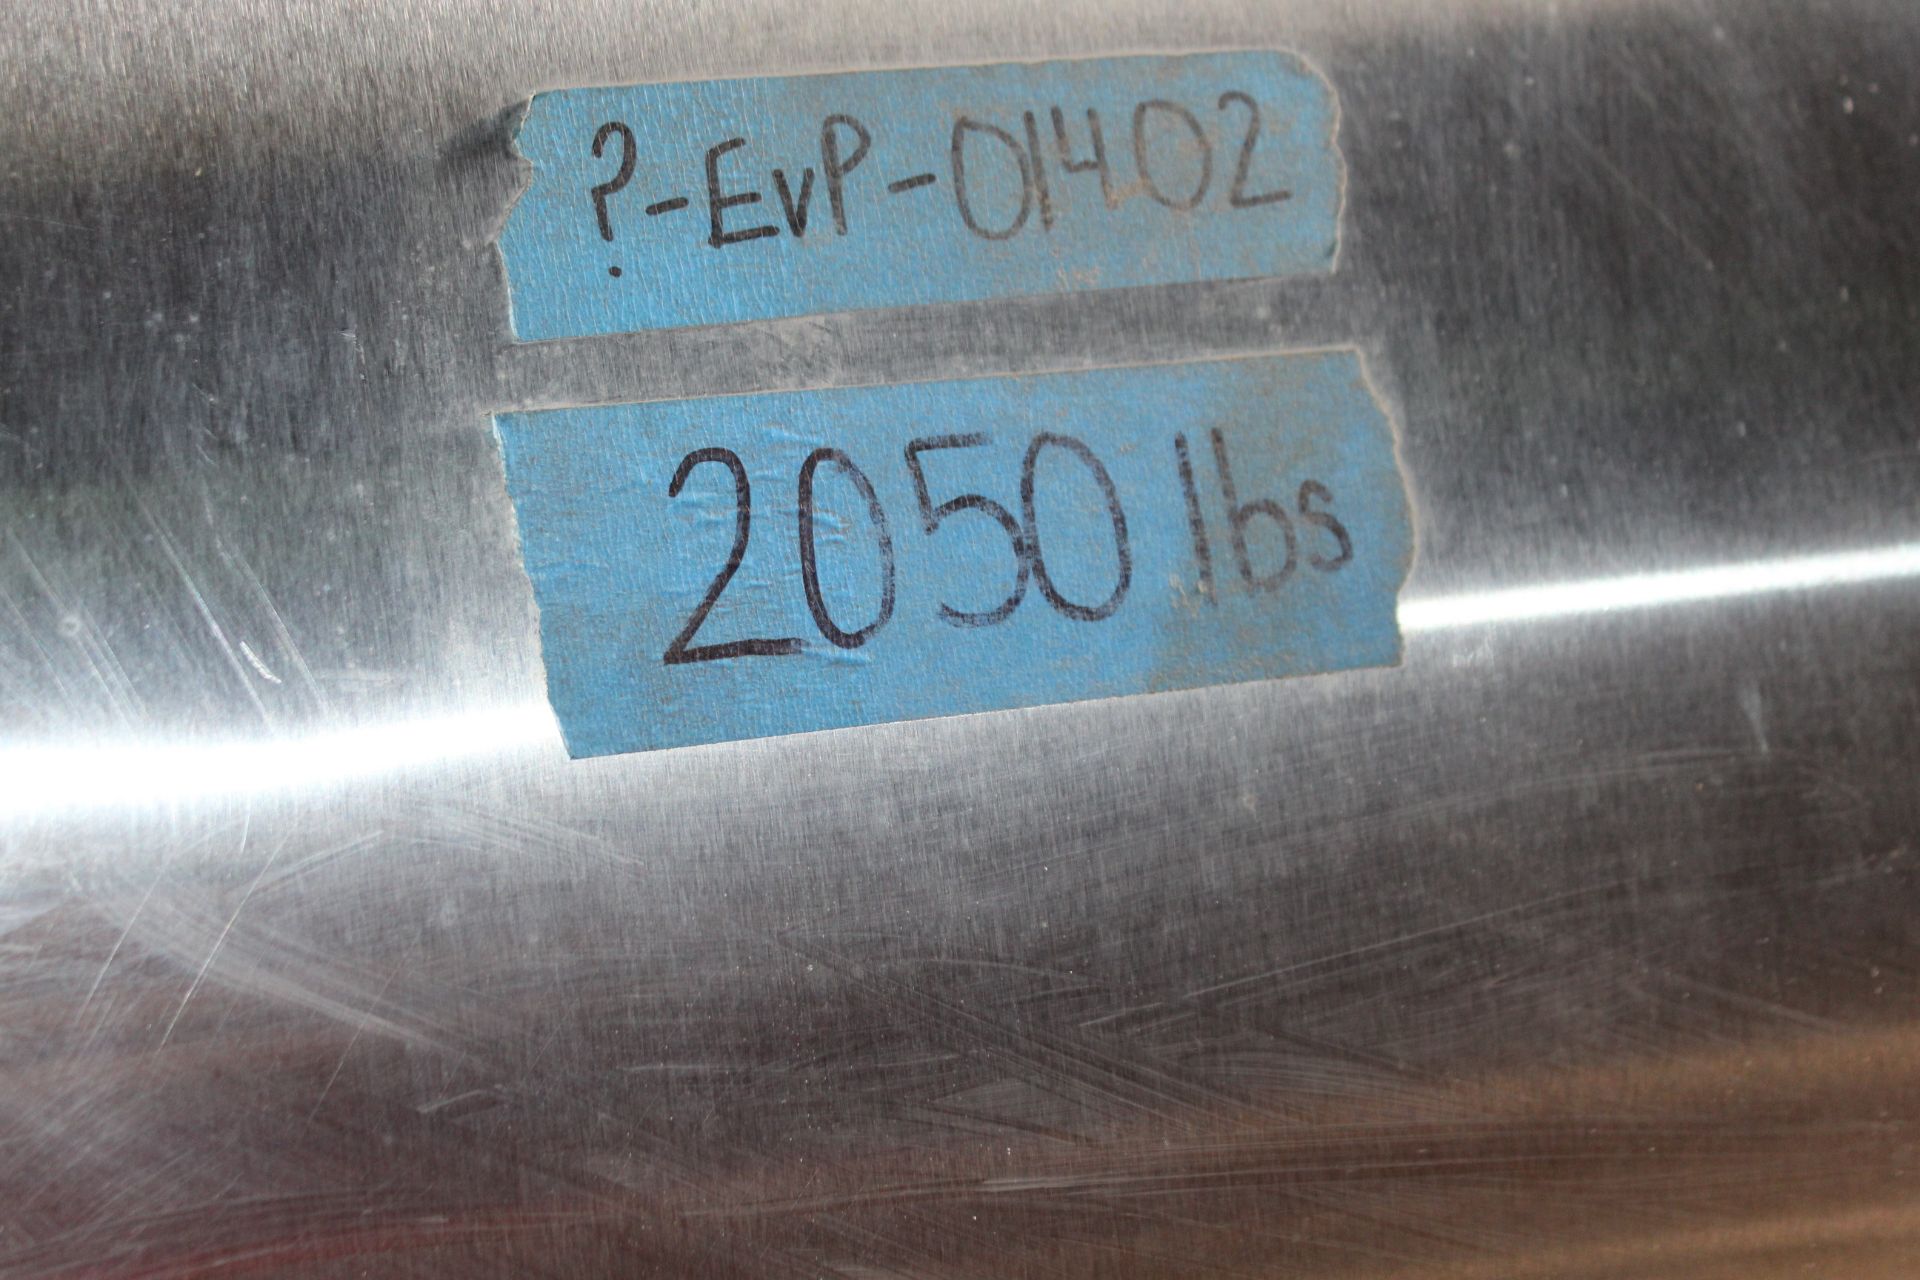 Chinz Manufacturer, Heating Chamber, 2050 Lbs. - Unused, - Image 3 of 6